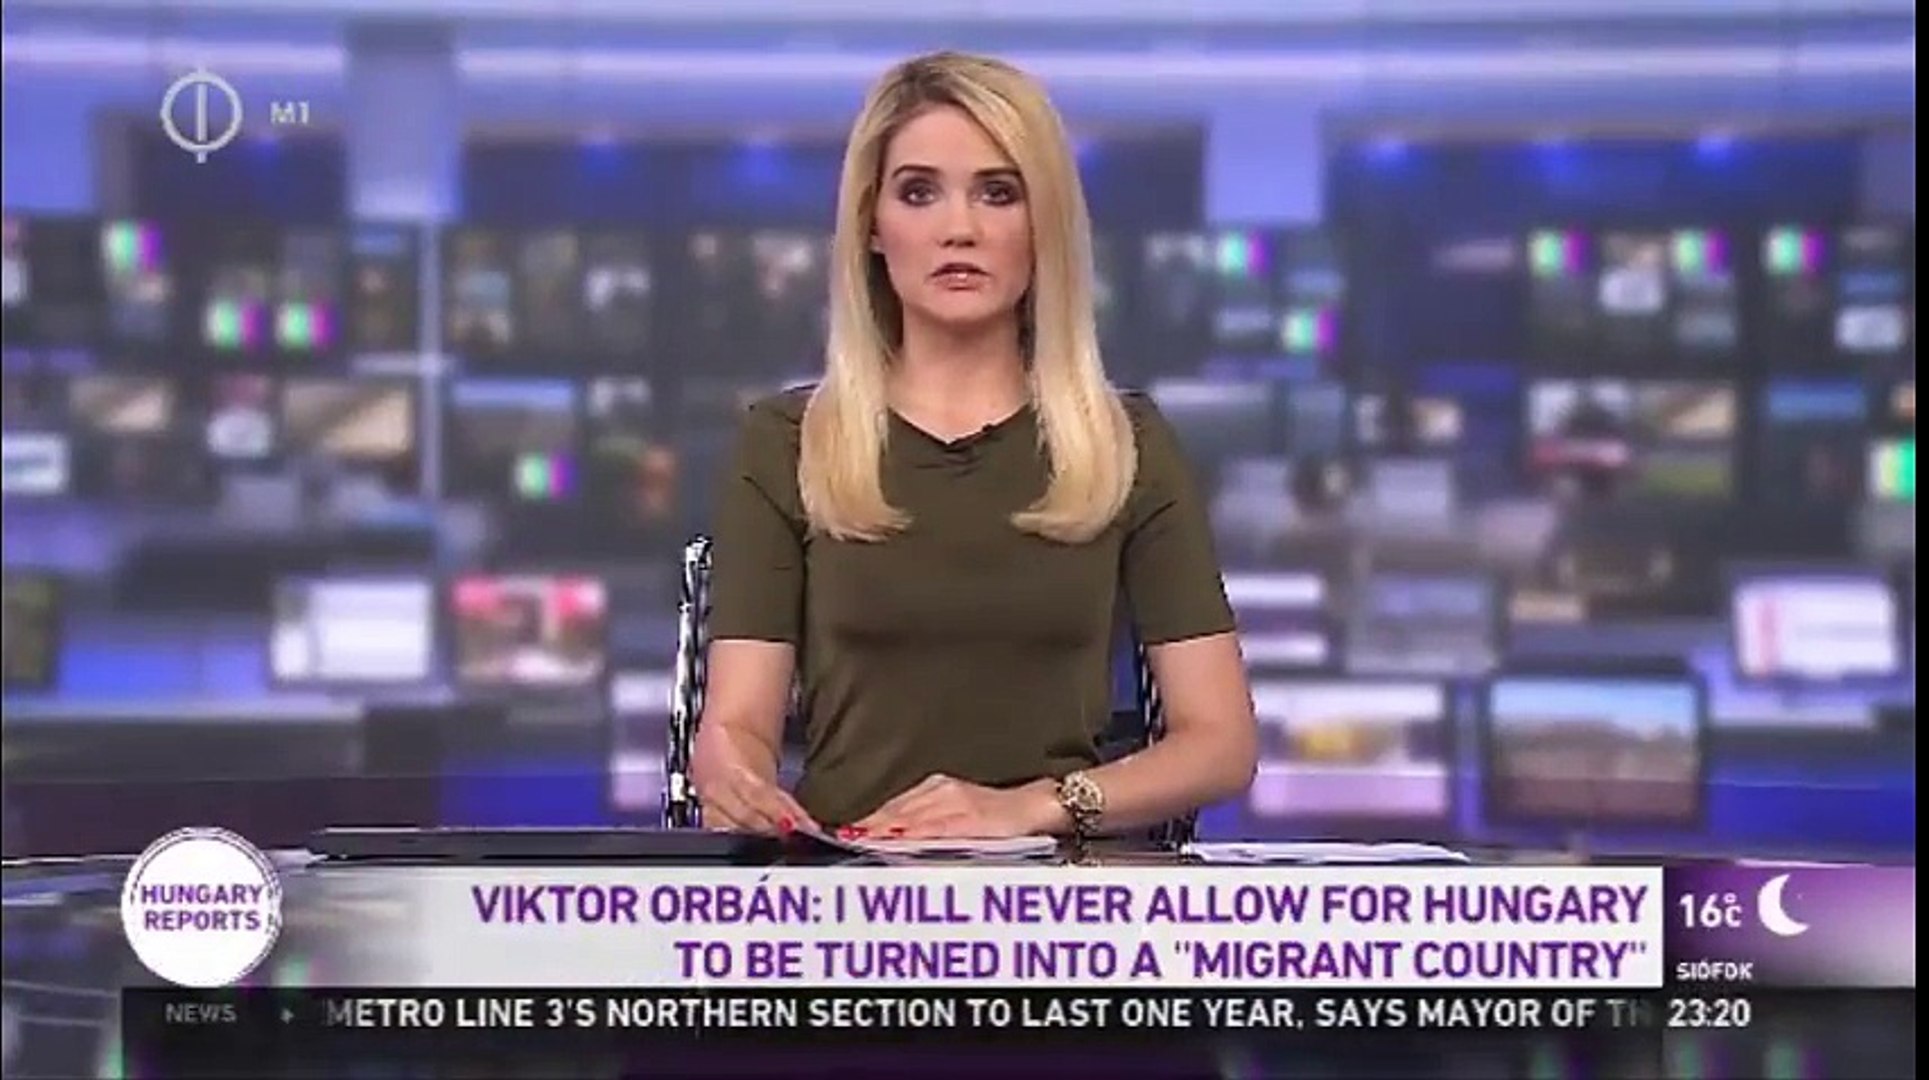 Viktor Orban: I Will Never Allow Hungary To Be Turned Into A